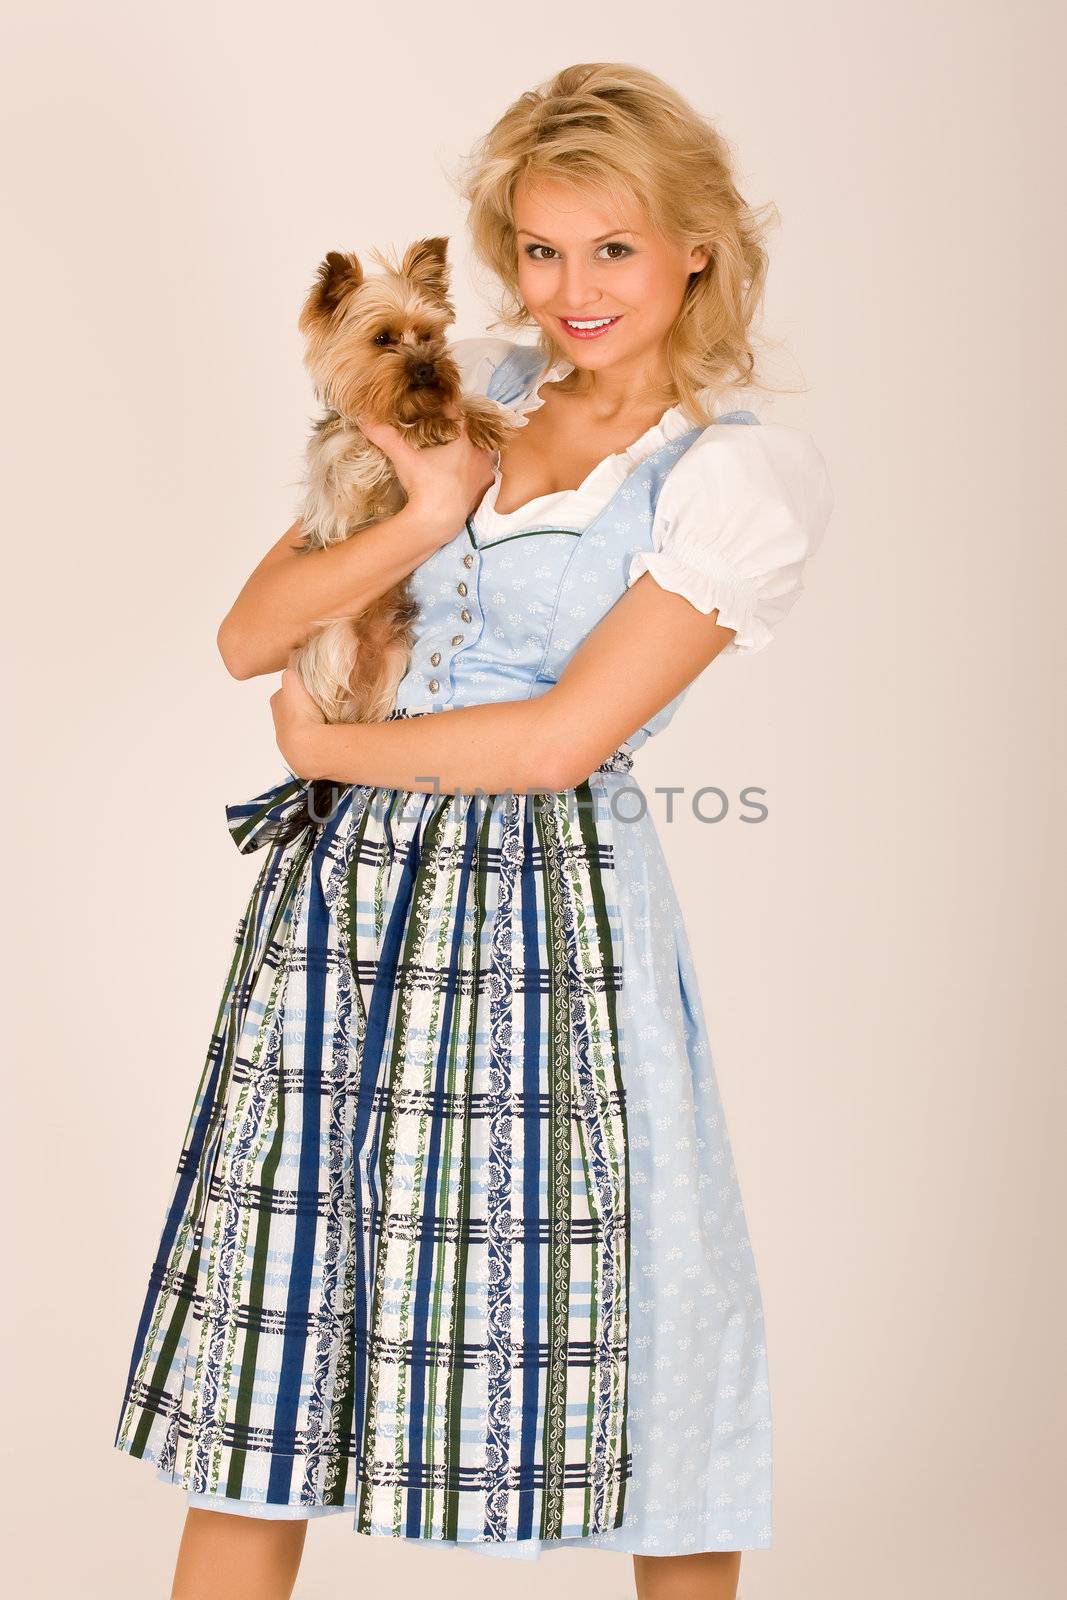 Bavarian Dirndl girls with Yorkshire terrier in her arms